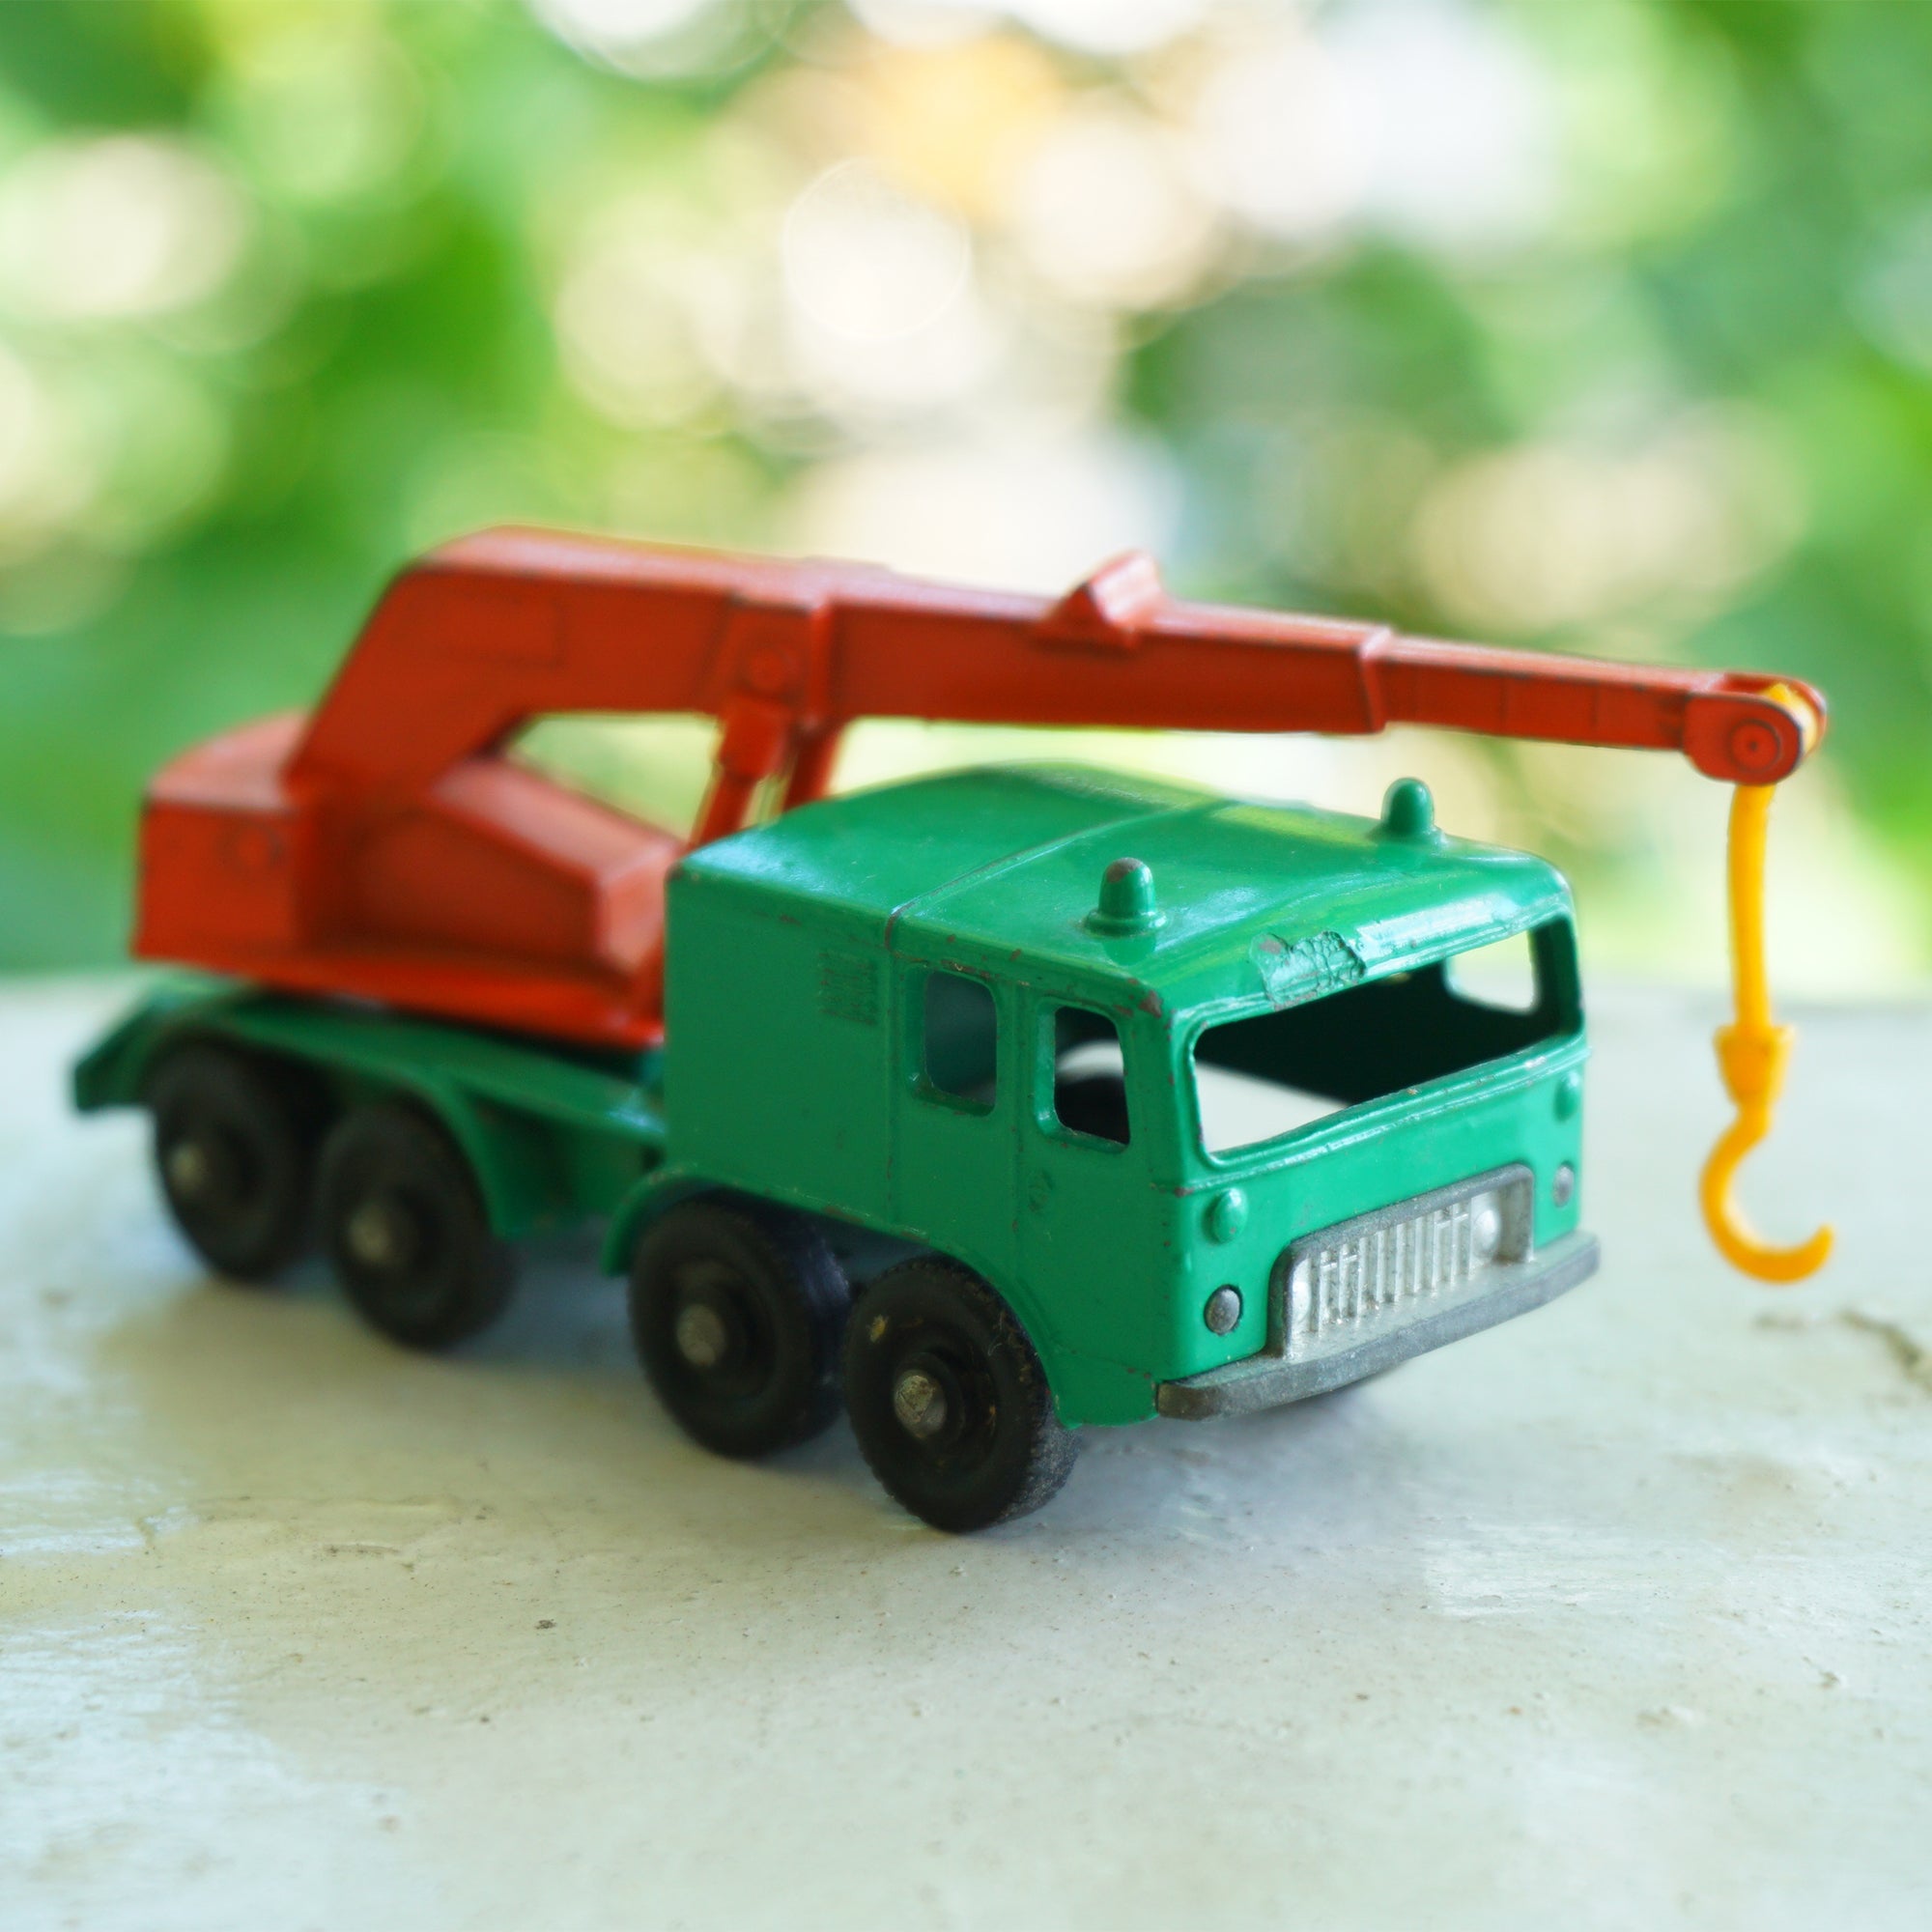 1965 Vintage Diecast MATCHBOX Series No. 30: 8 Wheel Crane. Made in England by Lesney.